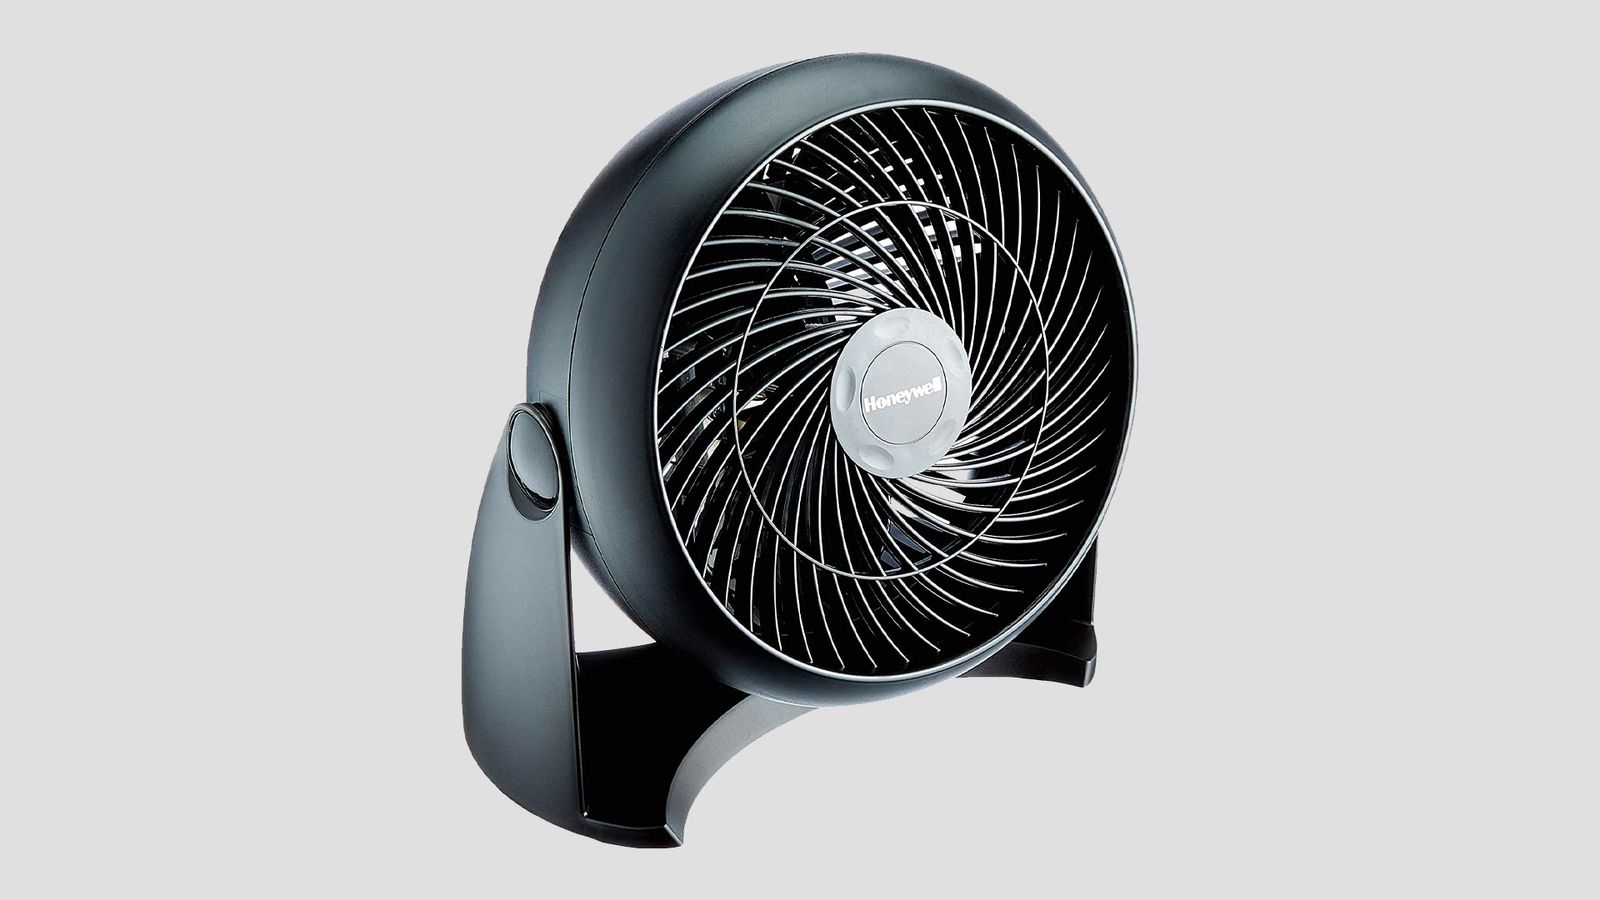 Honeywell HT 900E product image of a black fan with a grey centrepiece.